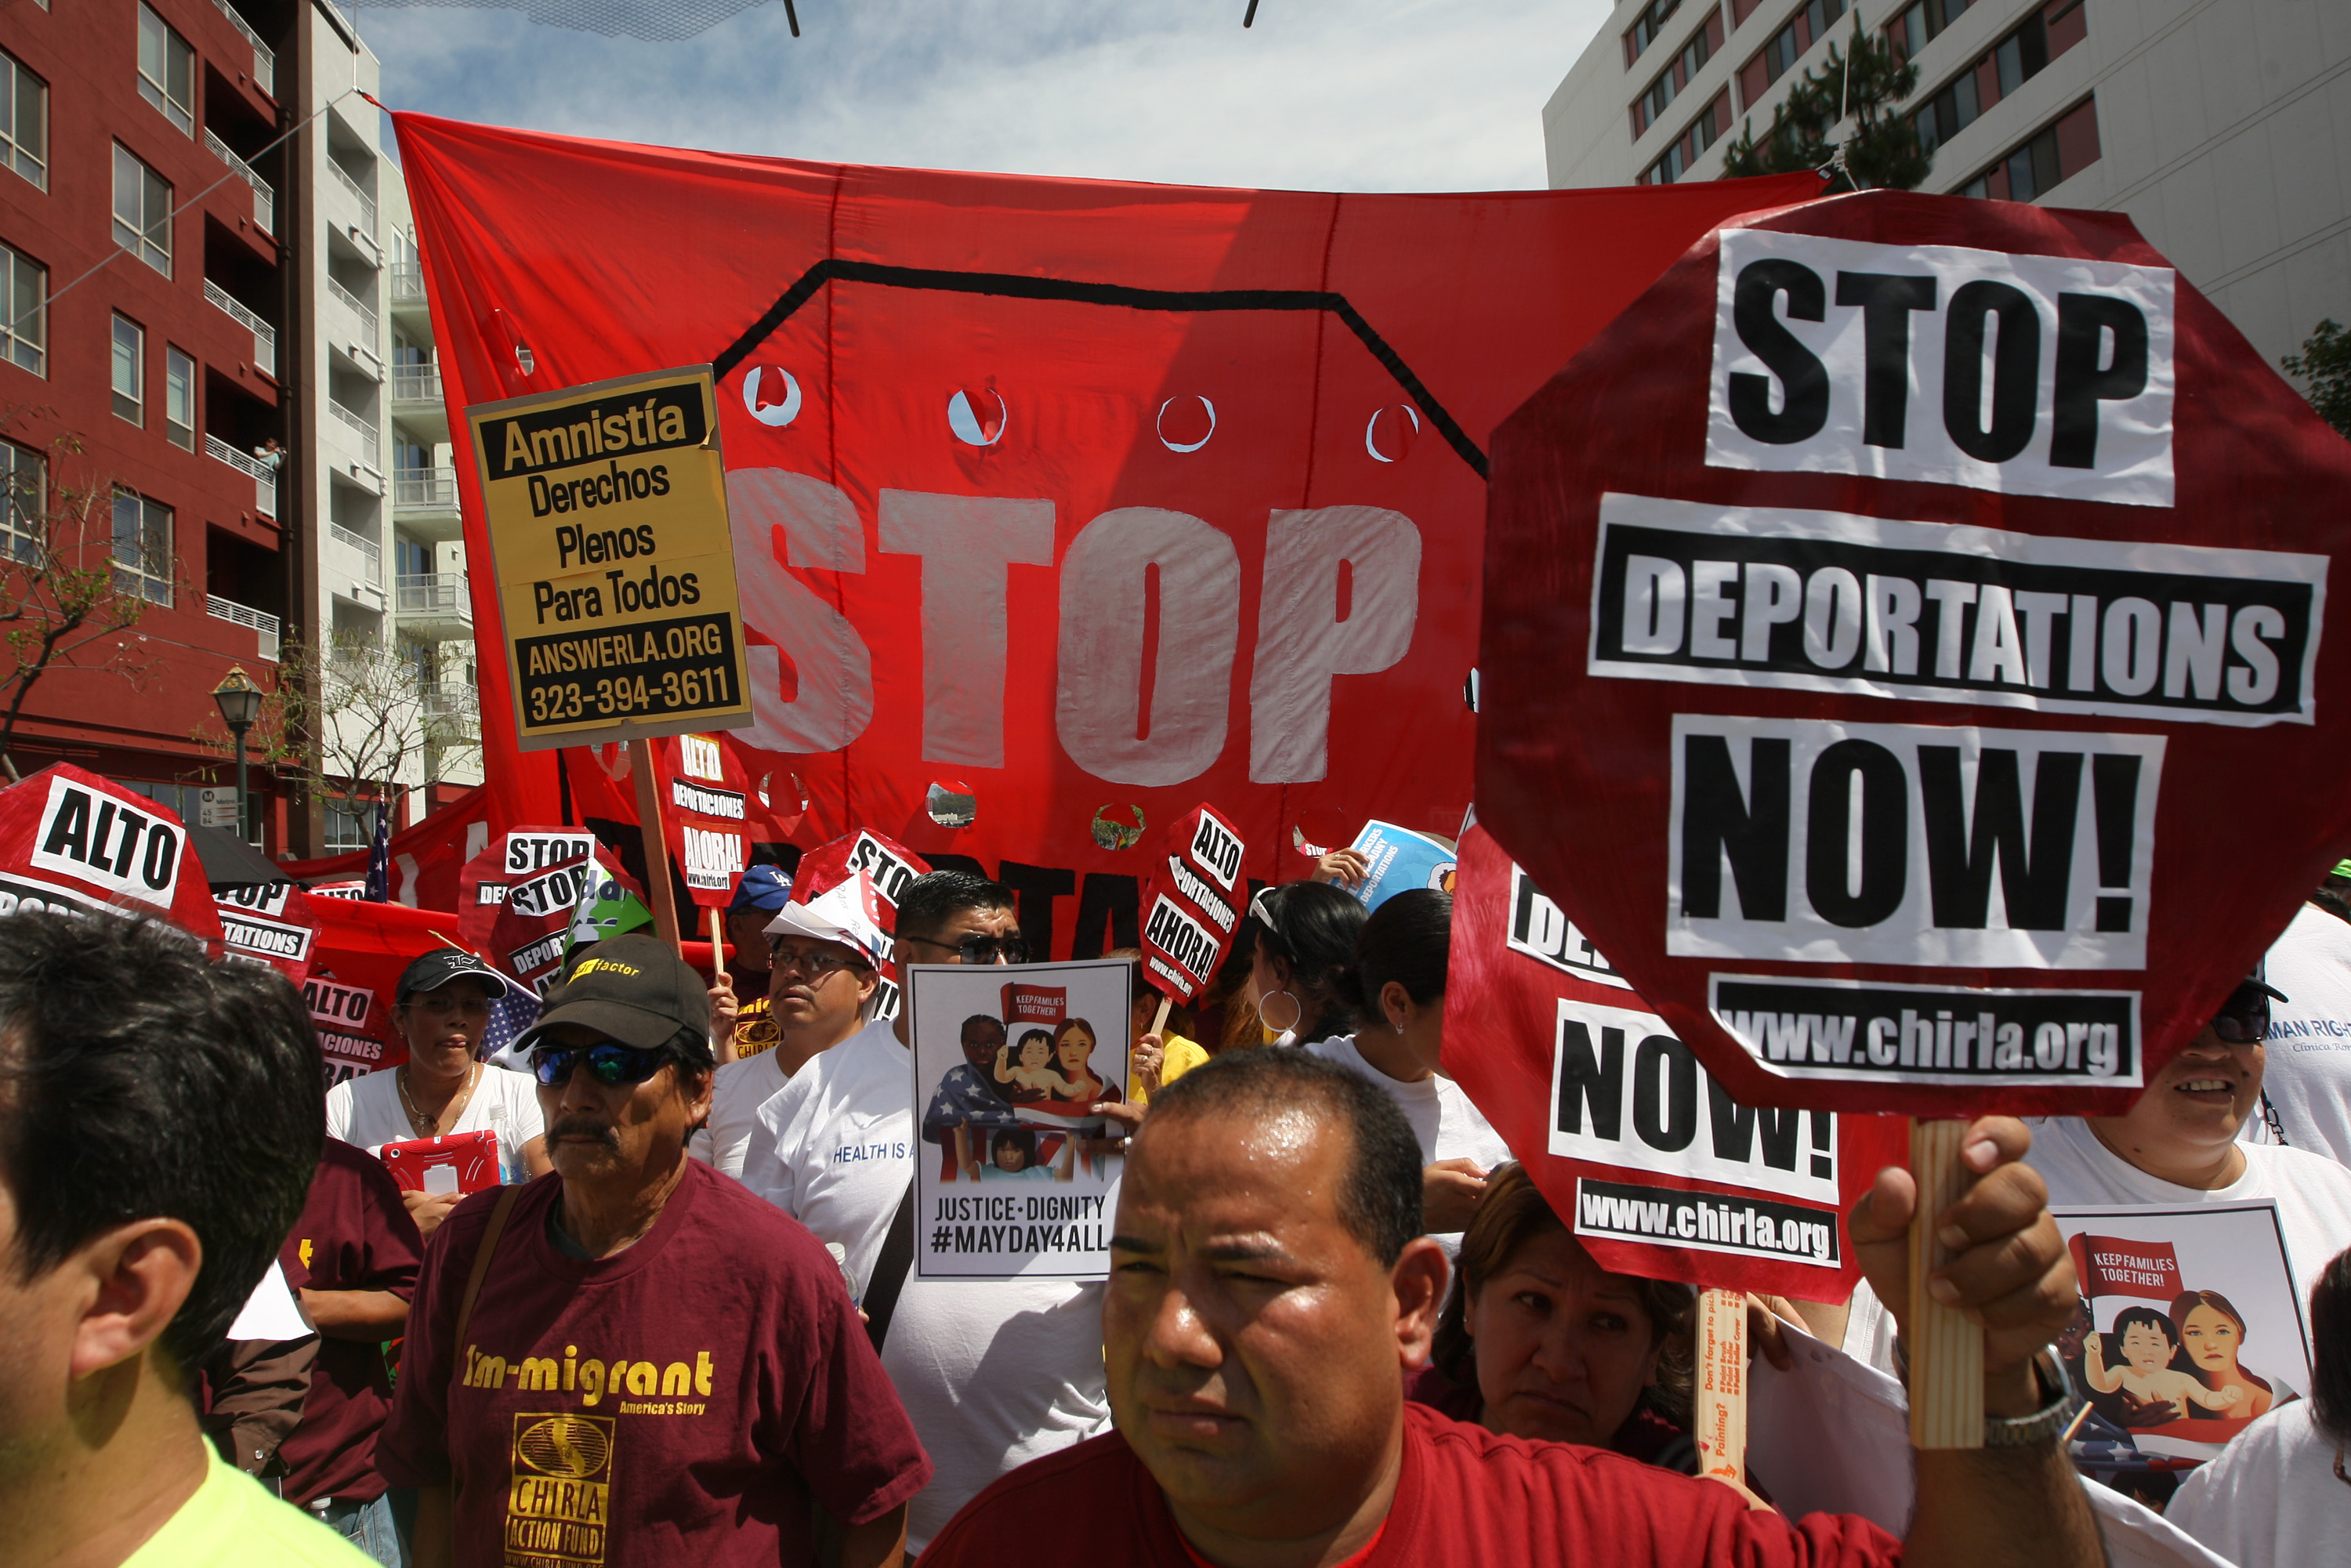 Marchers rally under the Chinatown Gateway before marching to the Metropolitan Detention Center during one a several May Day immigration-themed events on May 1, 2014 in Los Angeles, California. Demonstrators are calling for immigration reform and an end to deportations of undocumented residents. (David McNew—Getty Images)